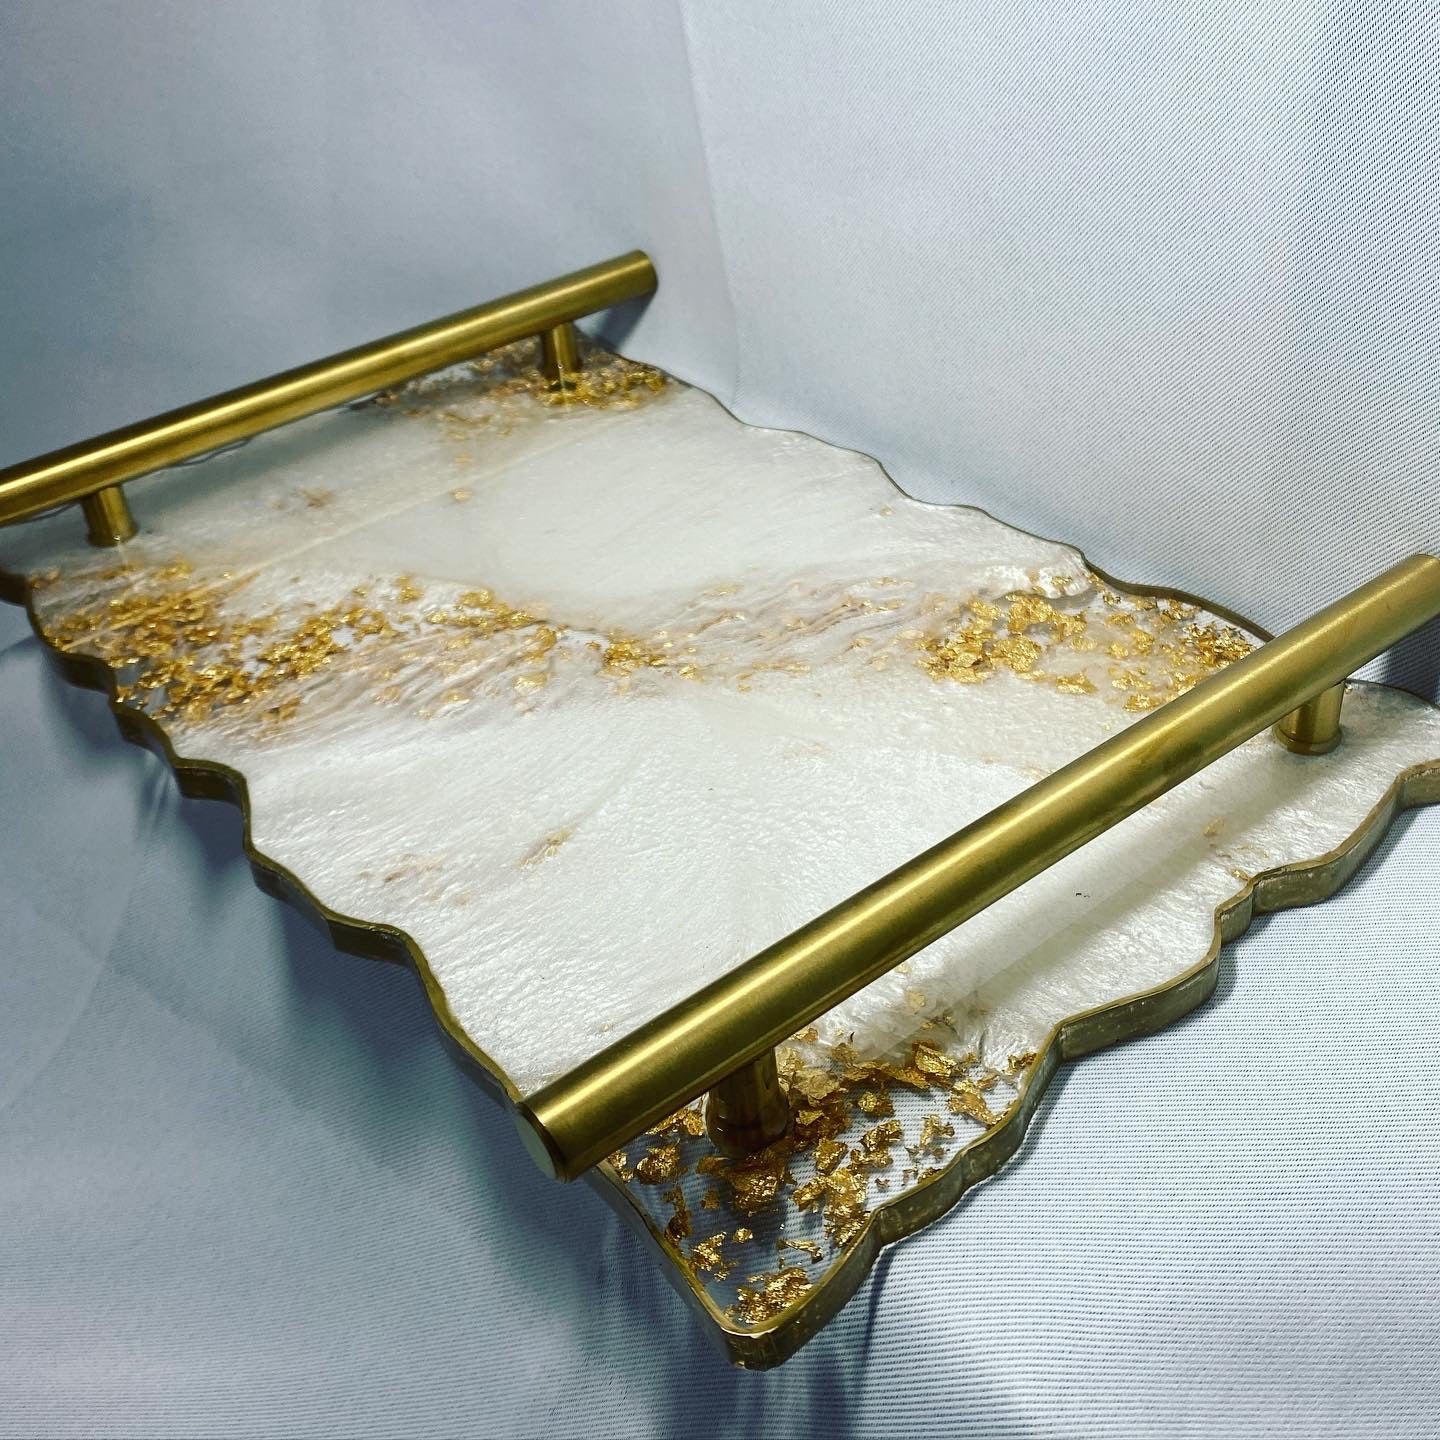 White and gold/silver large decorative tray